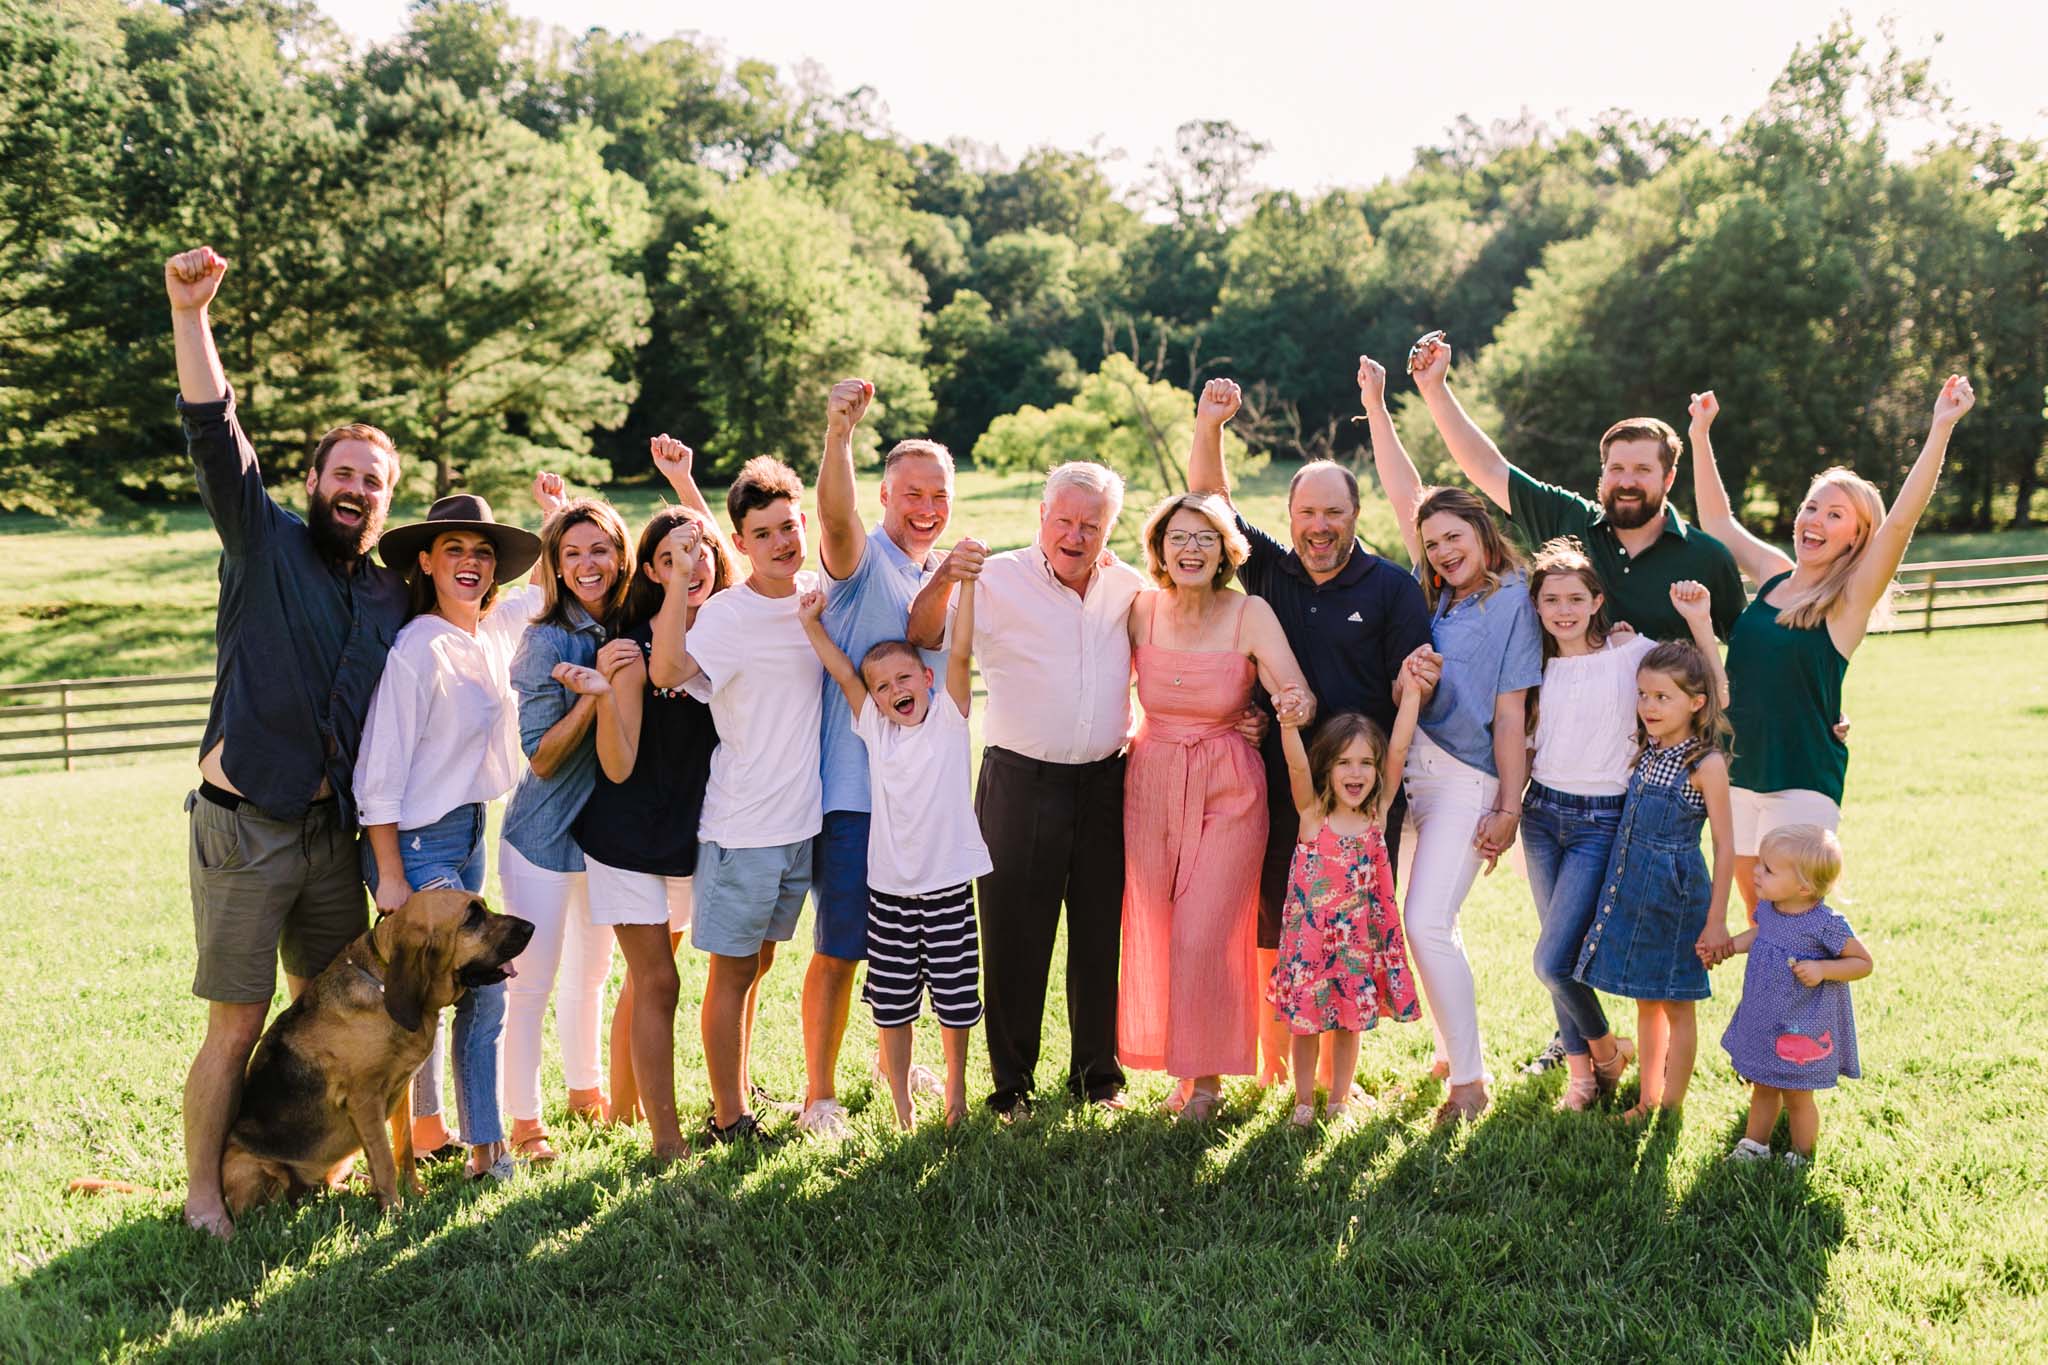 Durham Family Photographer | By G. Lin Photography | Family reunion photo with everyone raising their hands